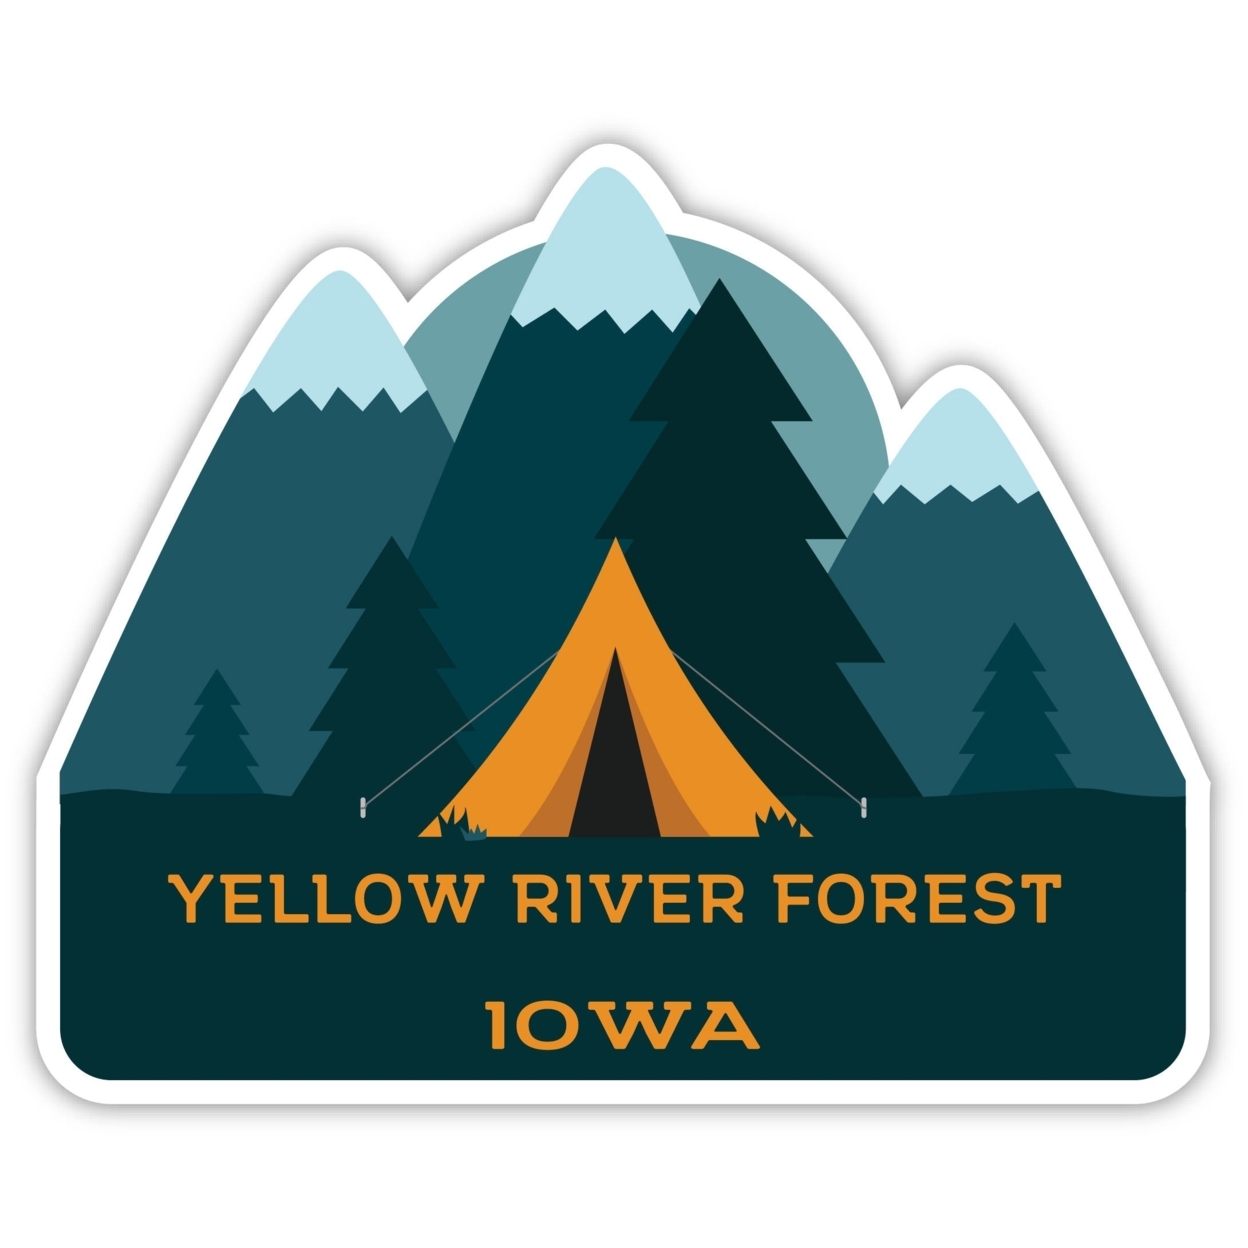 Yellow River Forest Iowa Souvenir Decorative Stickers (Choose Theme And Size) - Single Unit, 4-Inch, Tent